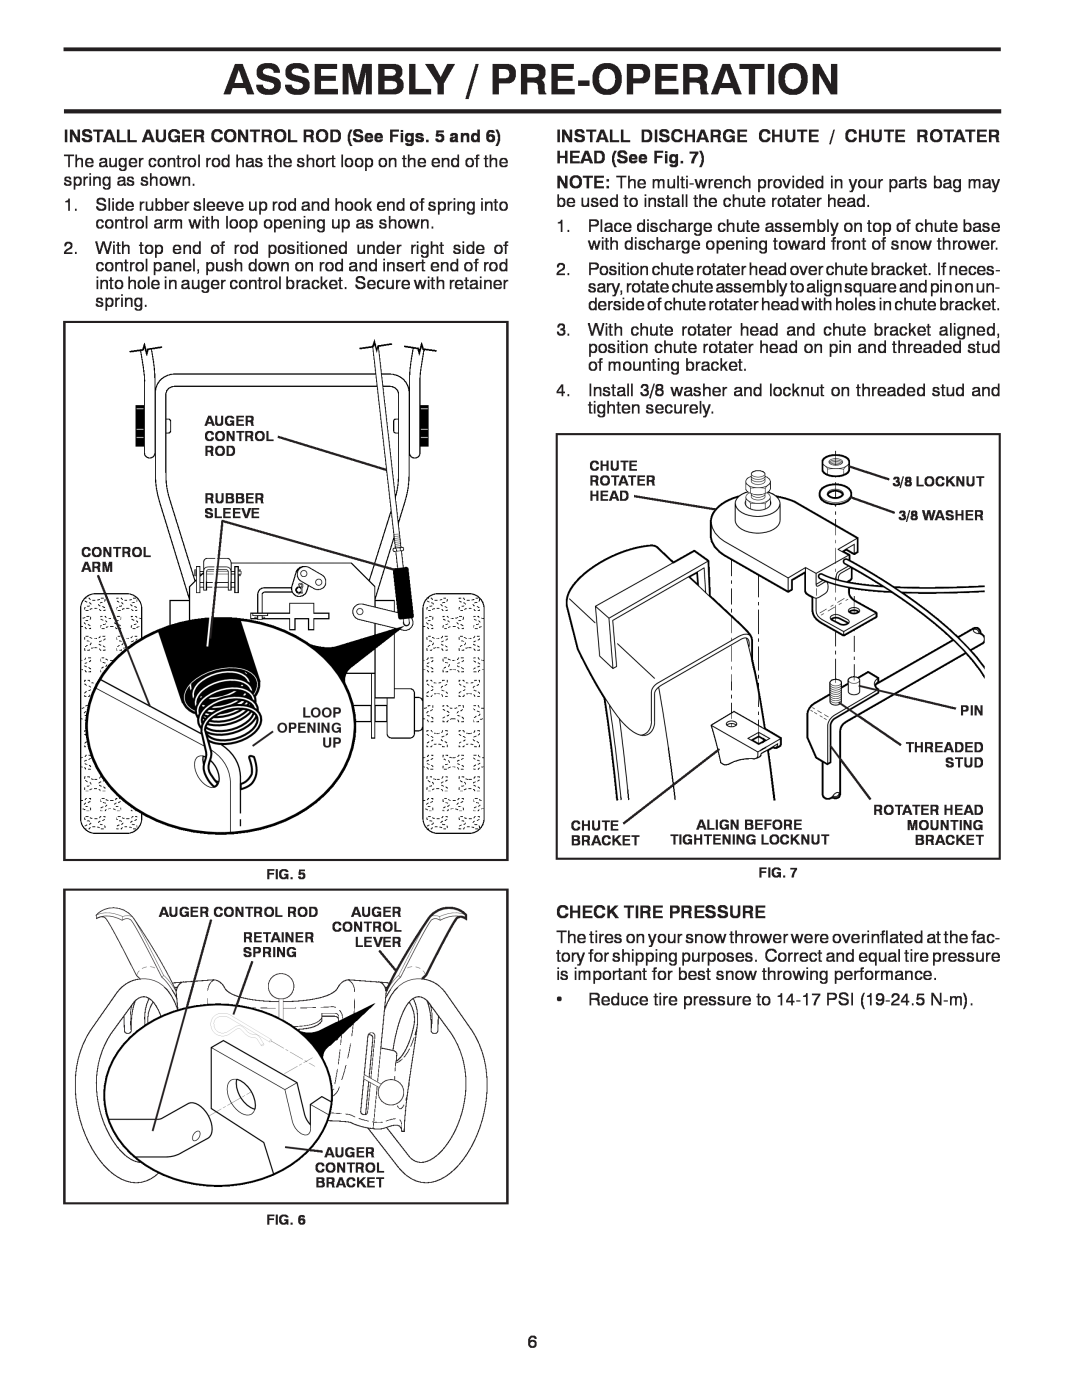 Poulan 96192002202, 422083 Assembly / Pre-Operation, INSTALL AUGER CONTROL ROD See Figs. 5 and, Check Tire Pressure 